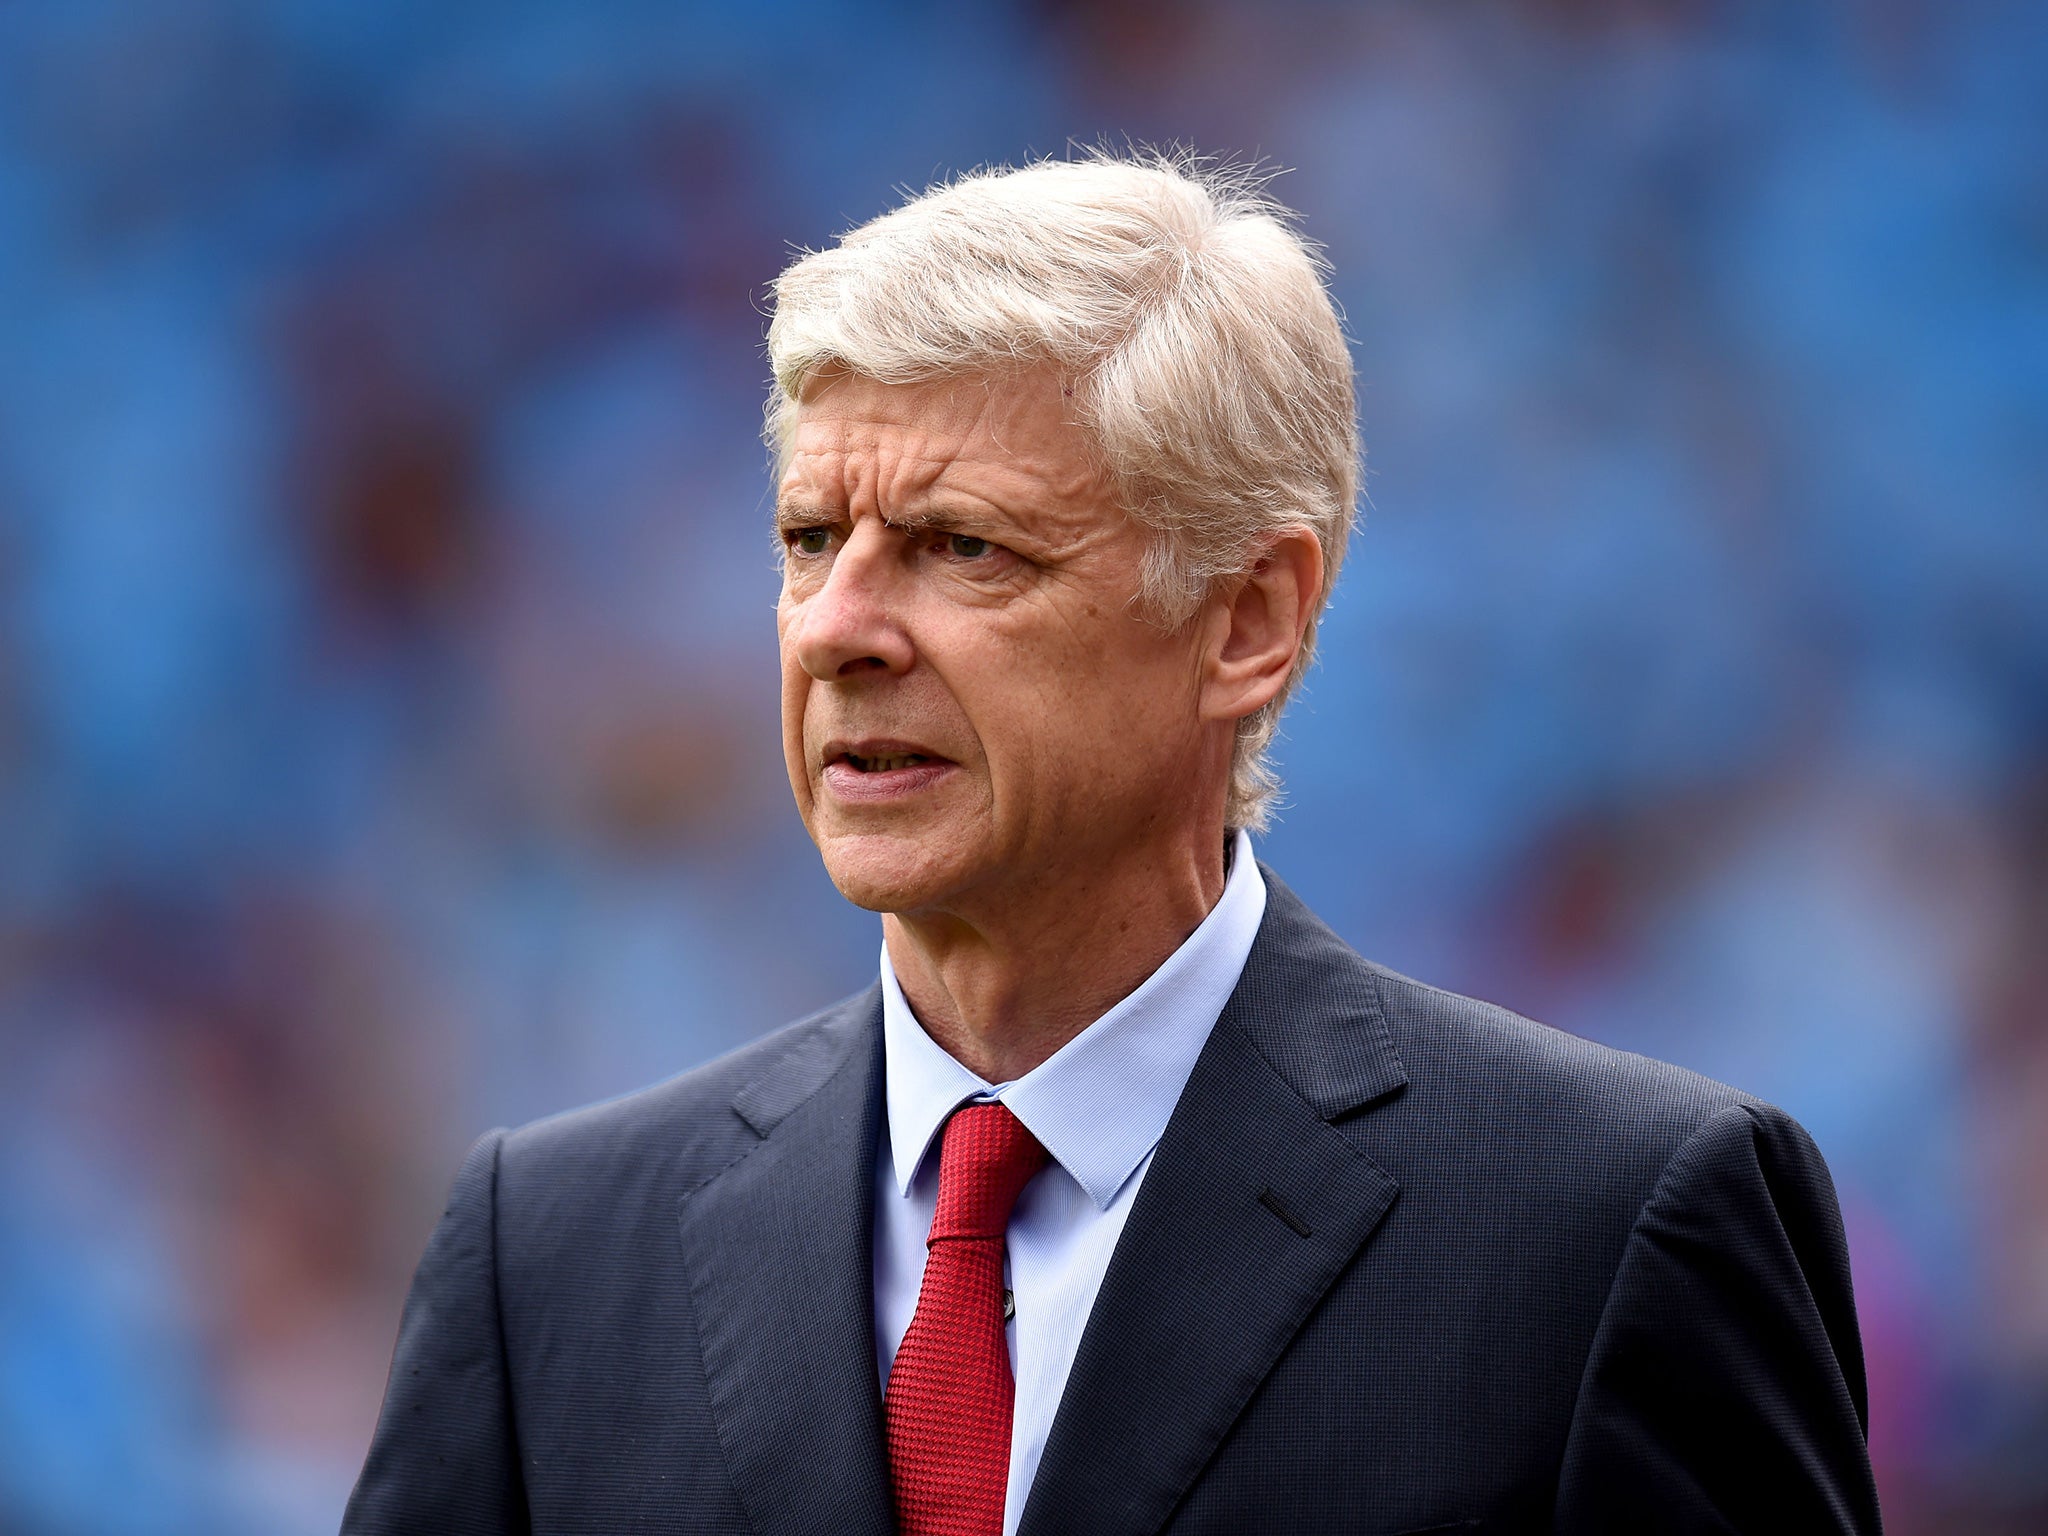 Arsène Wenger says European players do not relish physicality